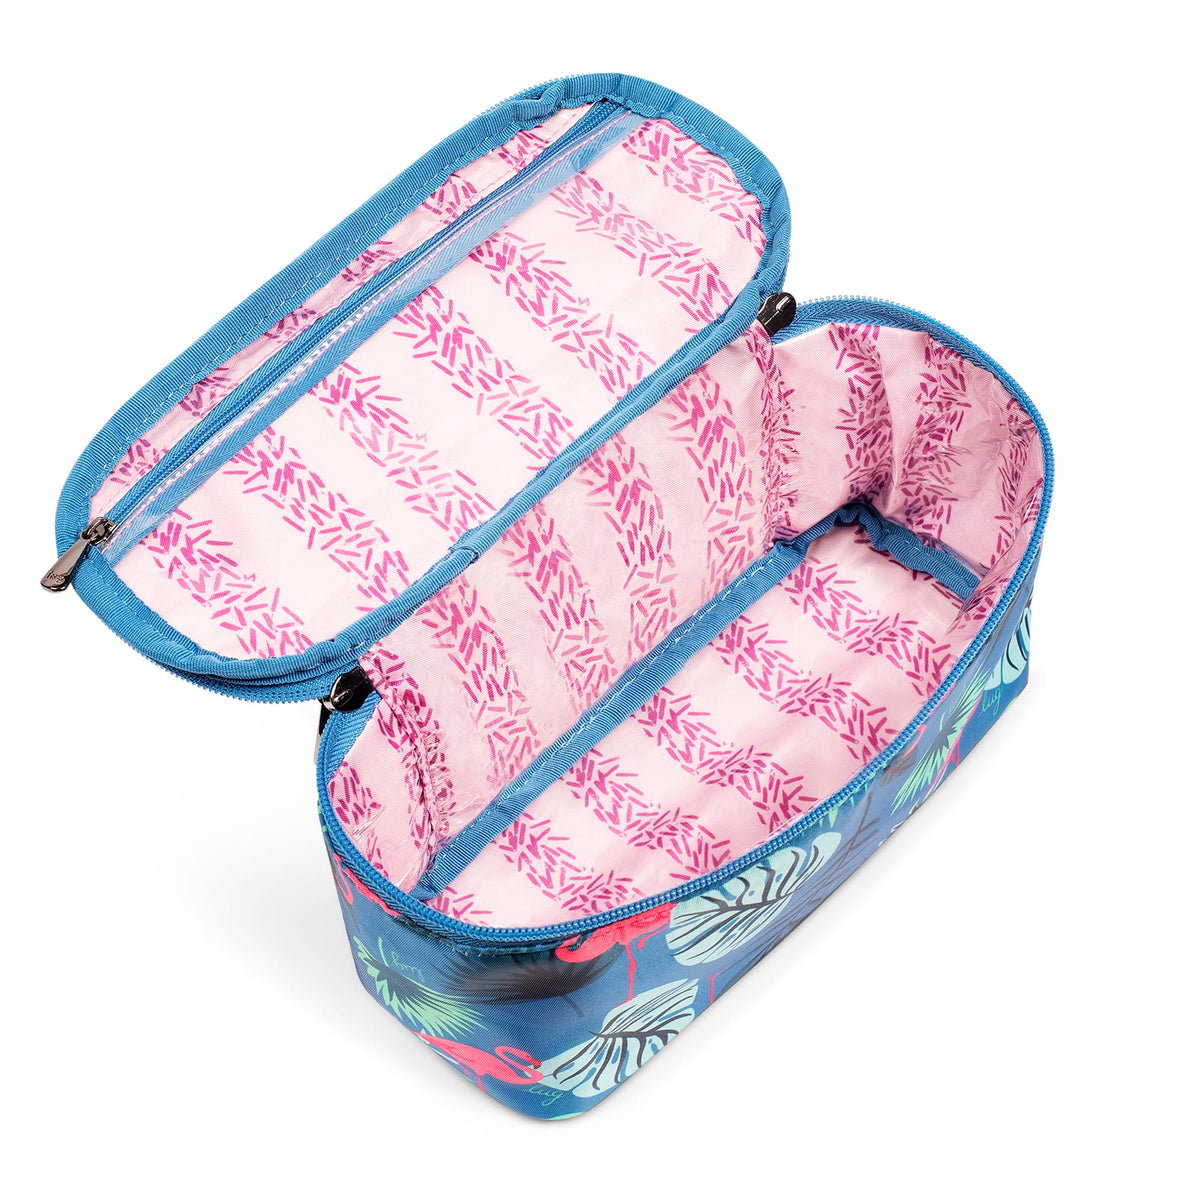 Dolly Short Cosmetic Case